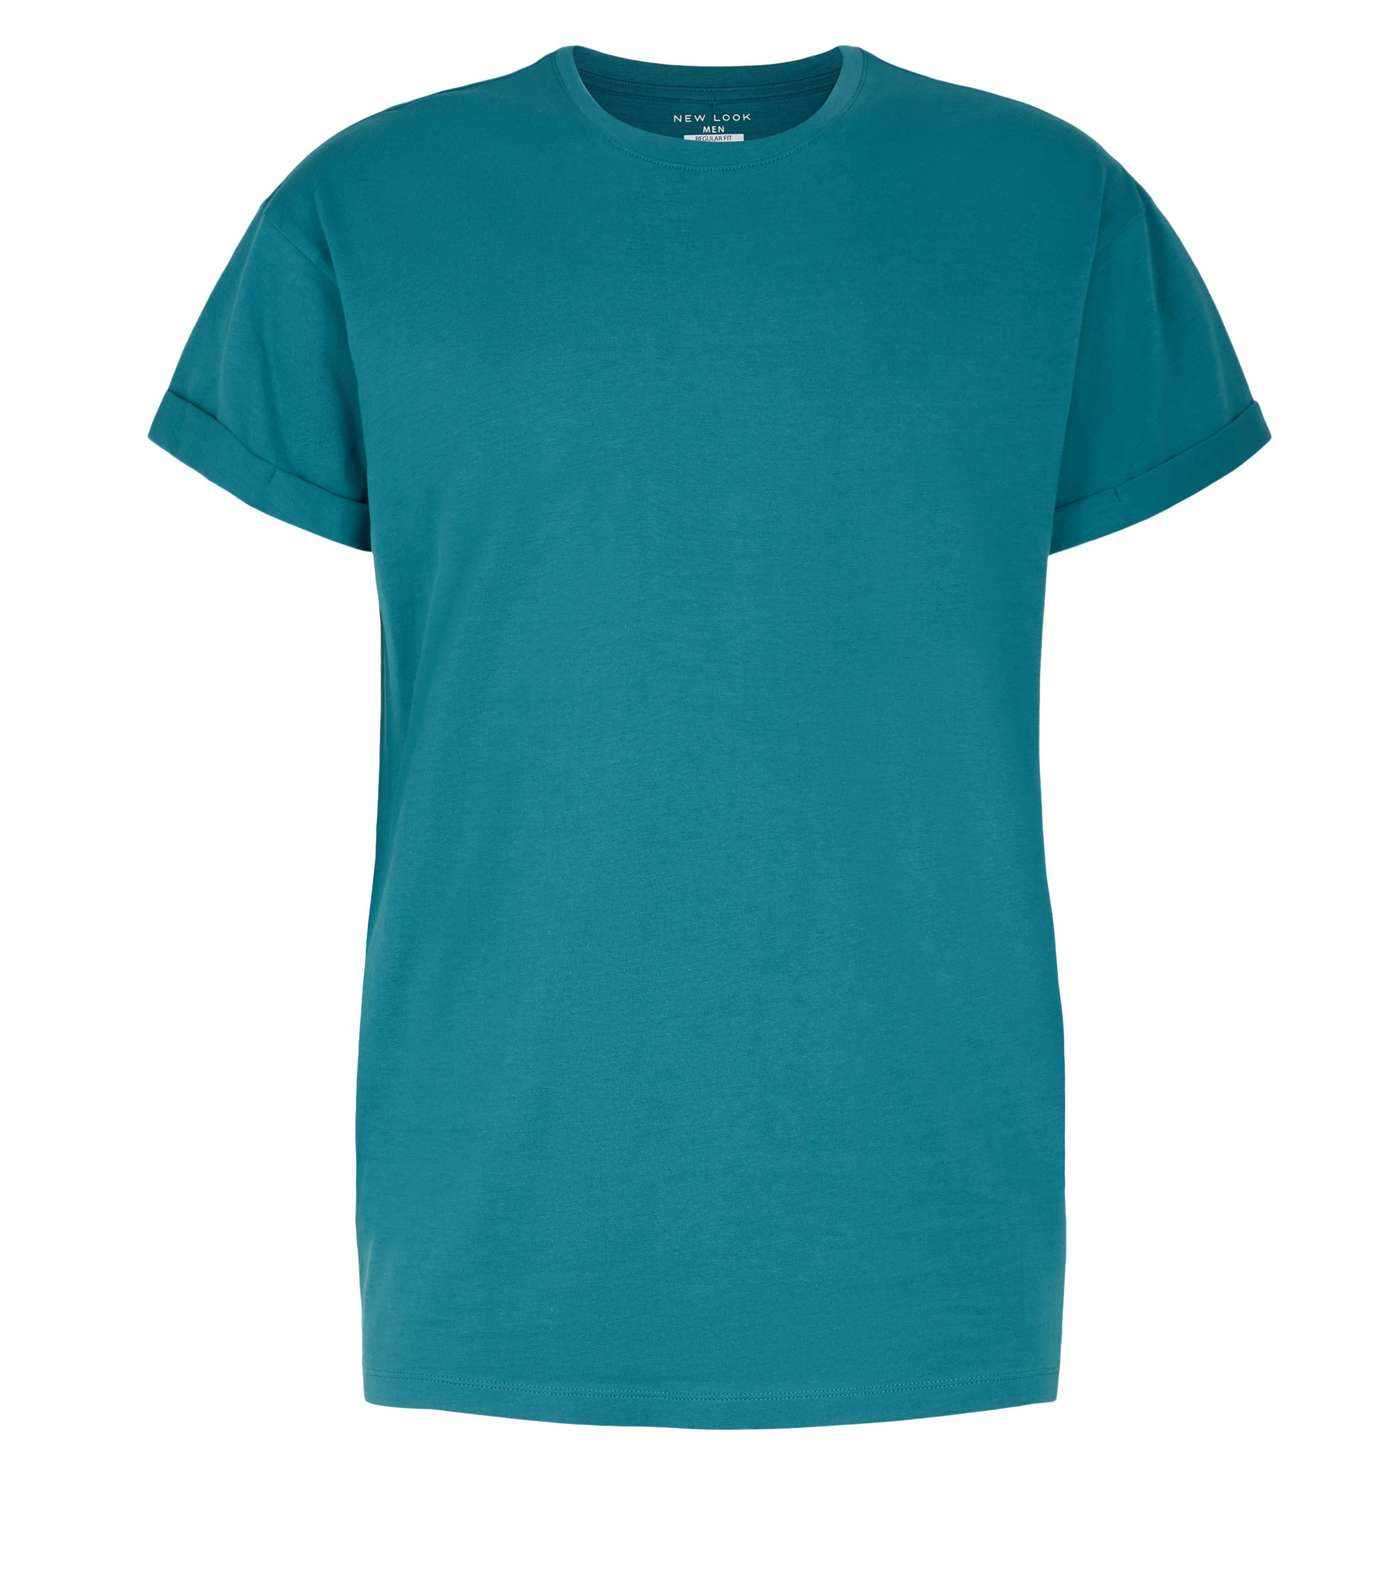 Teal Roll Sleeve T-Shirt Image 4